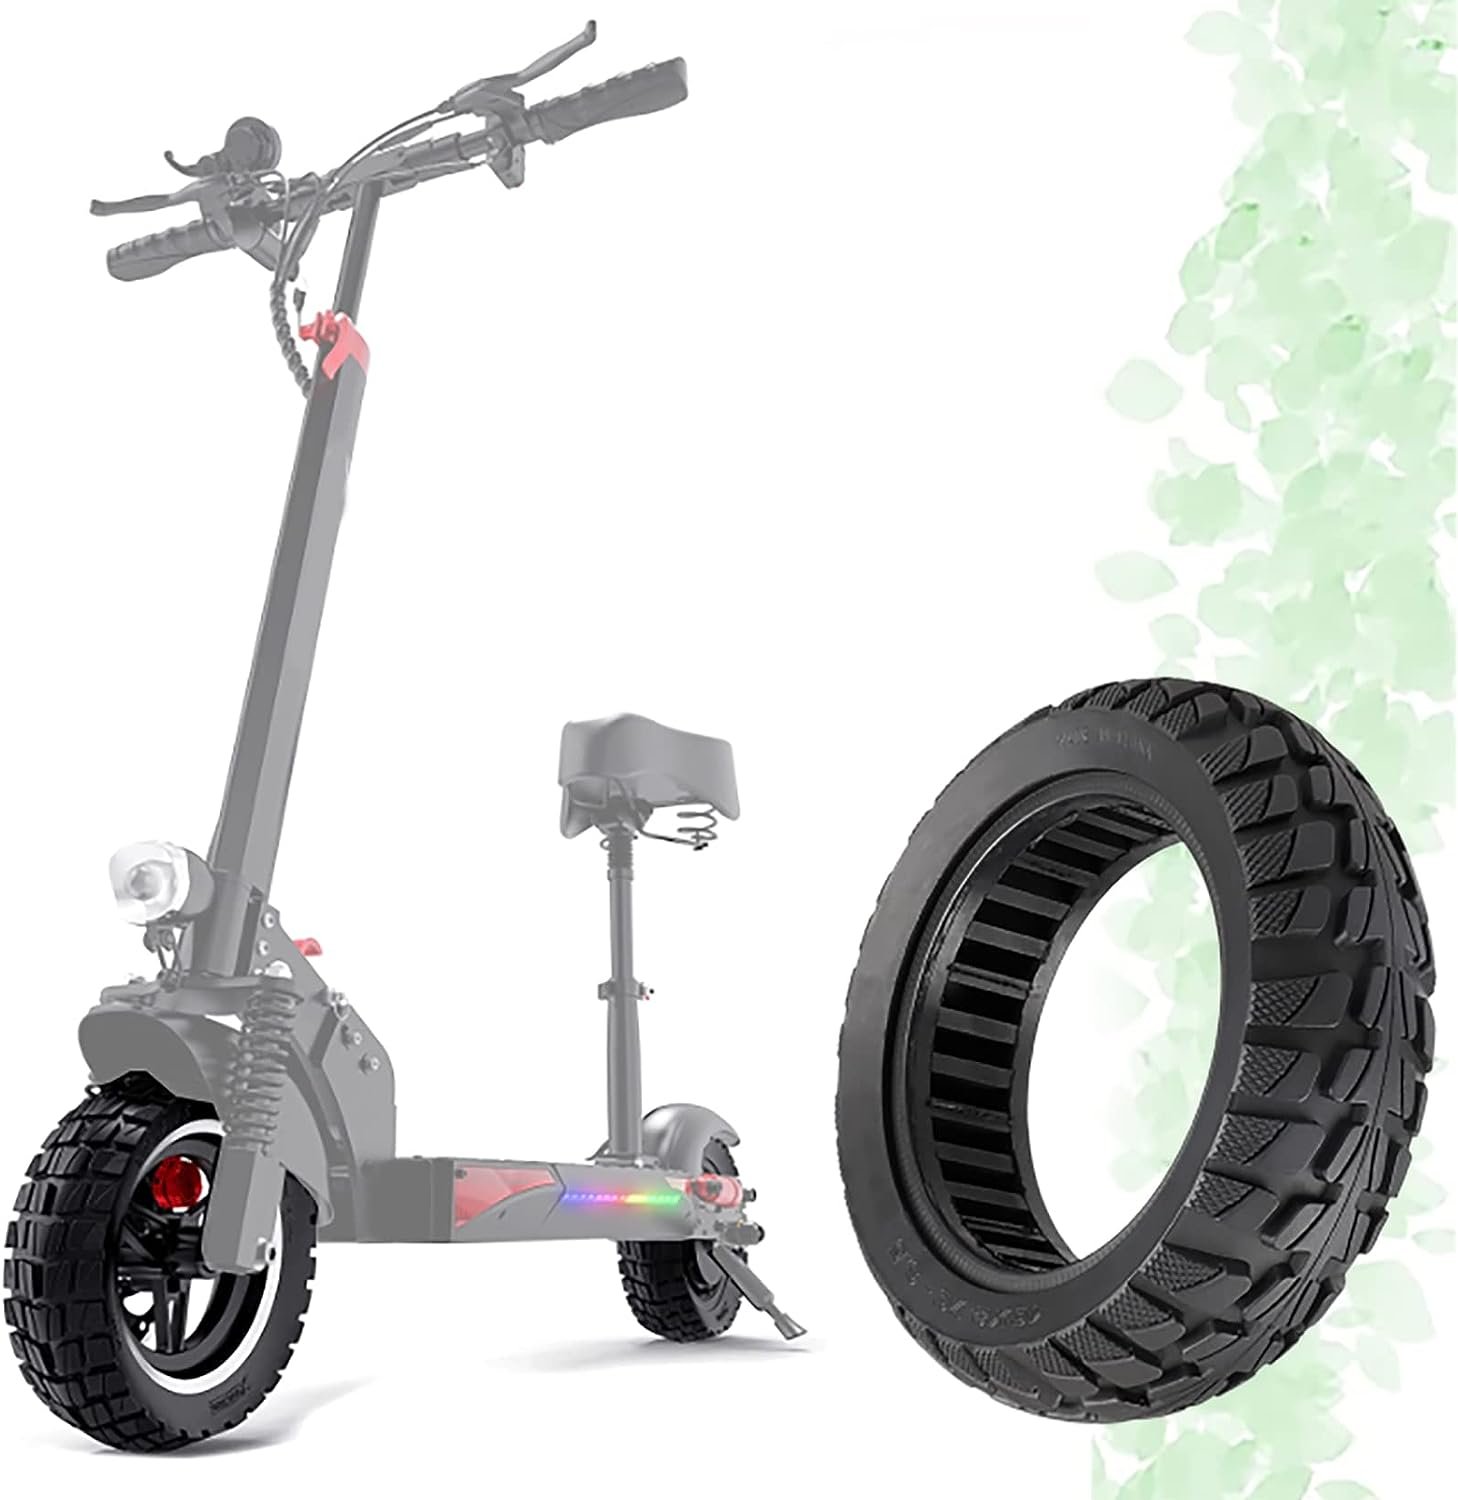 Stormytime 10 Inch Scooter Tires: 70/65-6.5 Solid Tire Replacement for Evercross H5 Hover 1 Alpha Hiboy Max3 Electric Scooter, 10x2.70-6.5, 10x2.75-6.5, 10 Off Road Anti-Skid Wheels